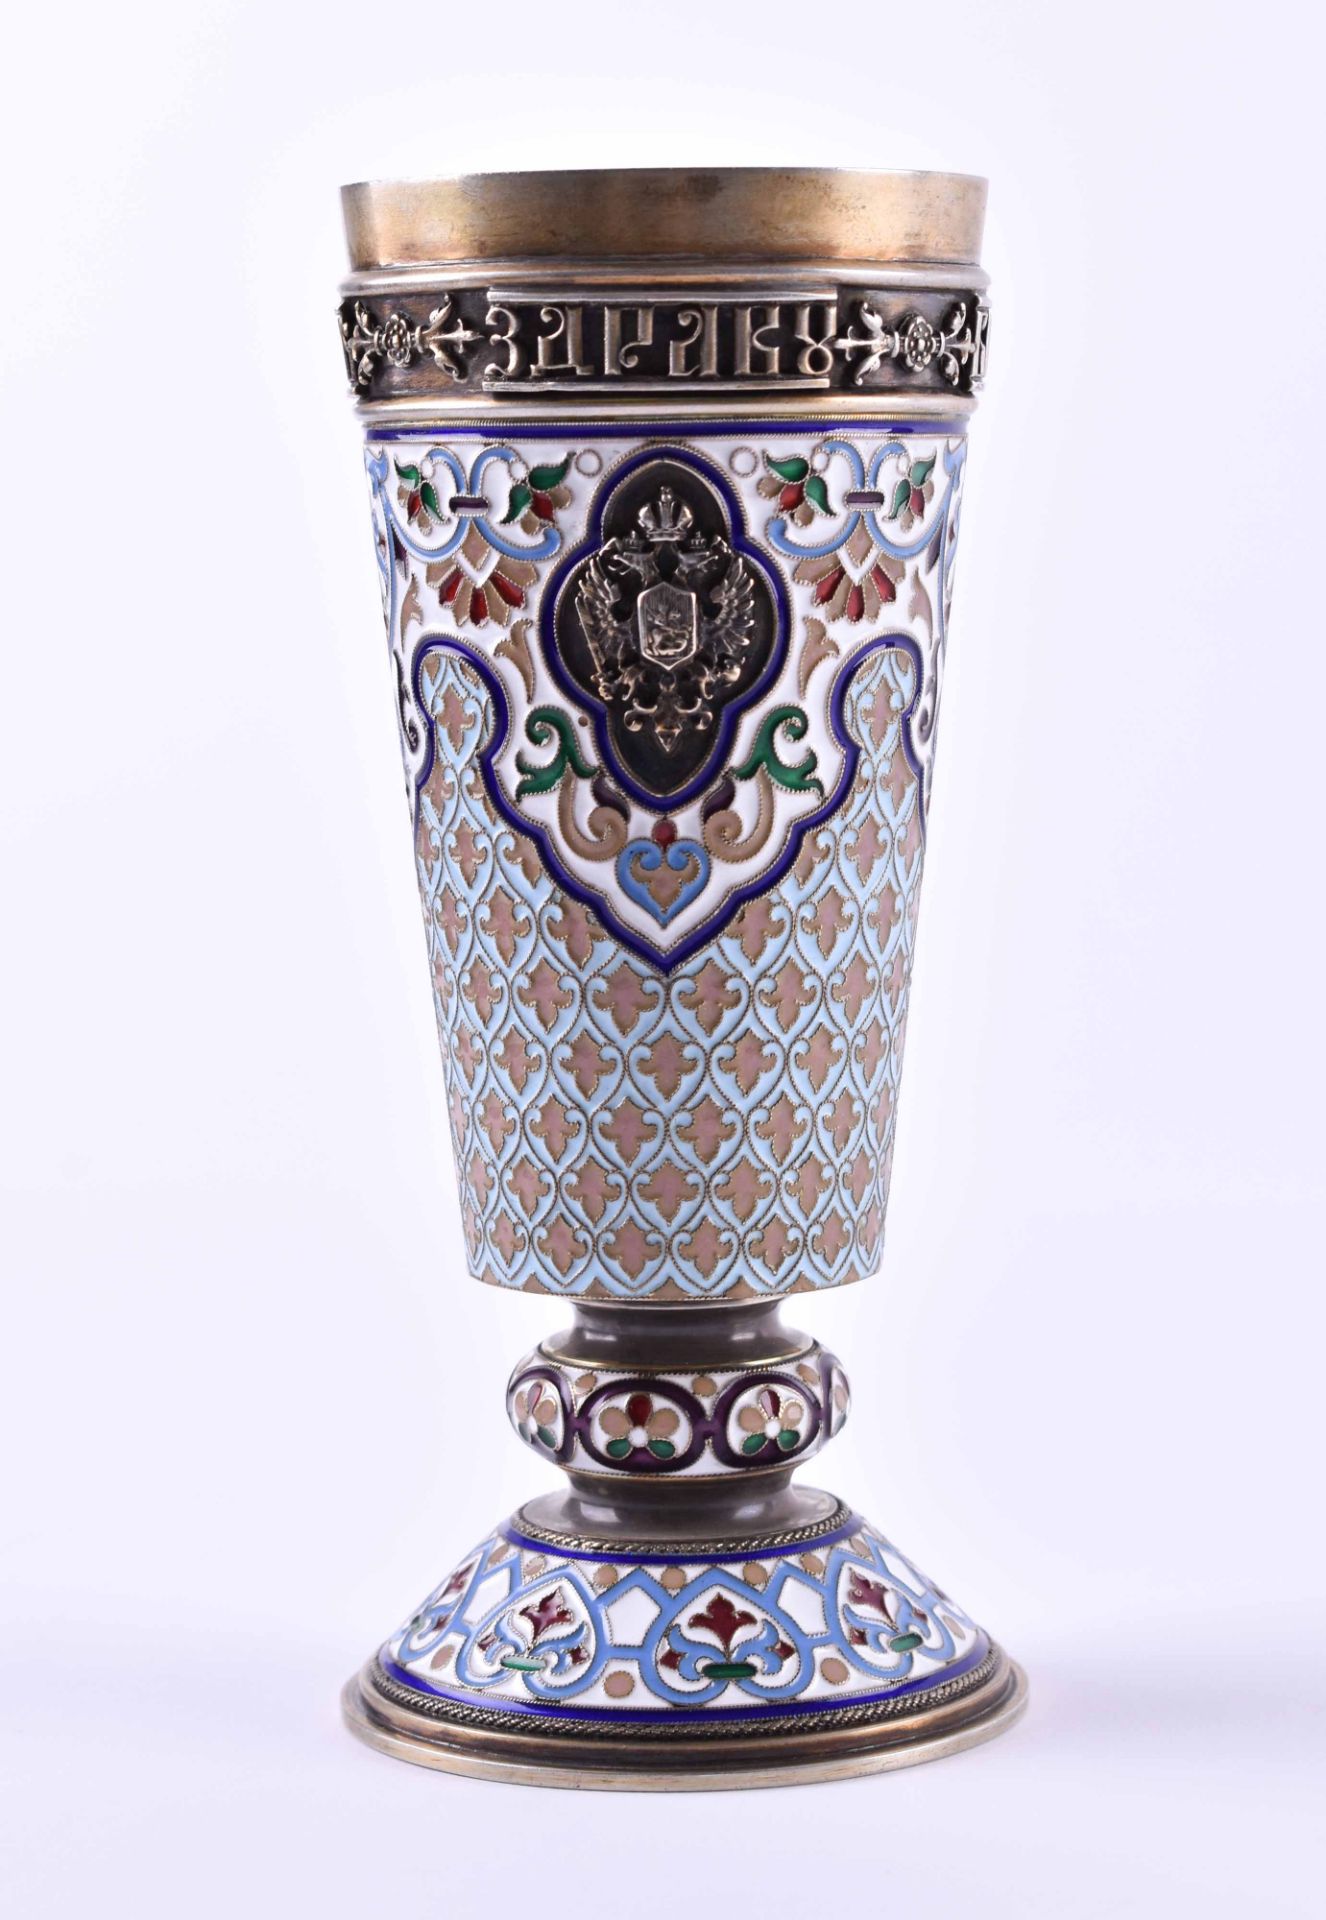 Cloisonné Becher Russiasilver 84 zolotnik gilded, tsar coat of arms and coat of arms of Alexander